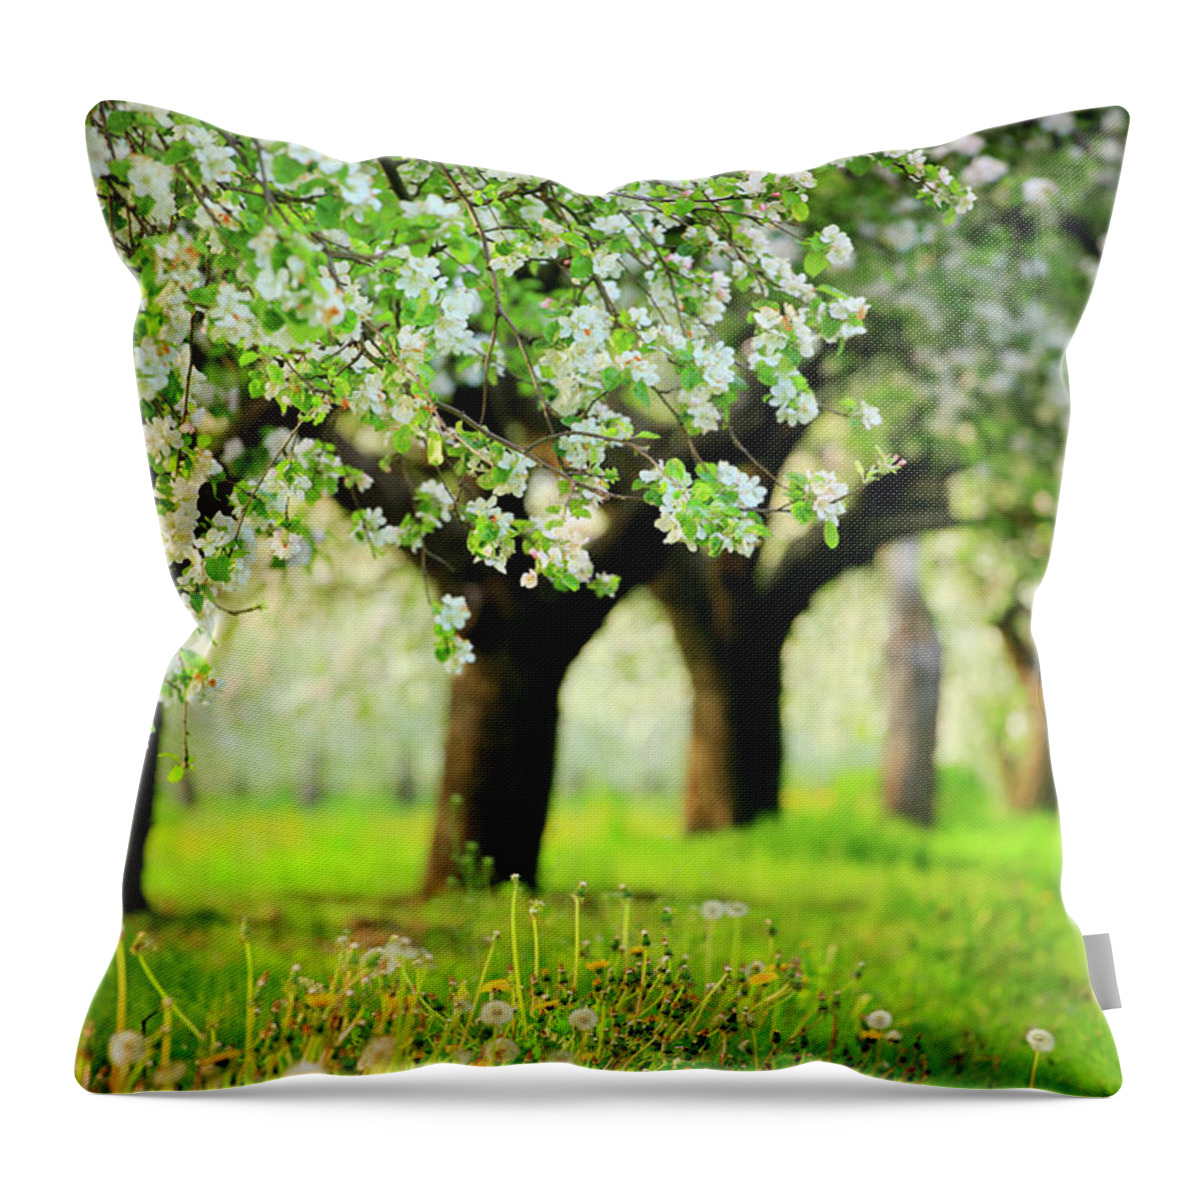 Environmental Conservation Throw Pillow featuring the photograph Spring Orchard - Blooming Trees by Konradlew